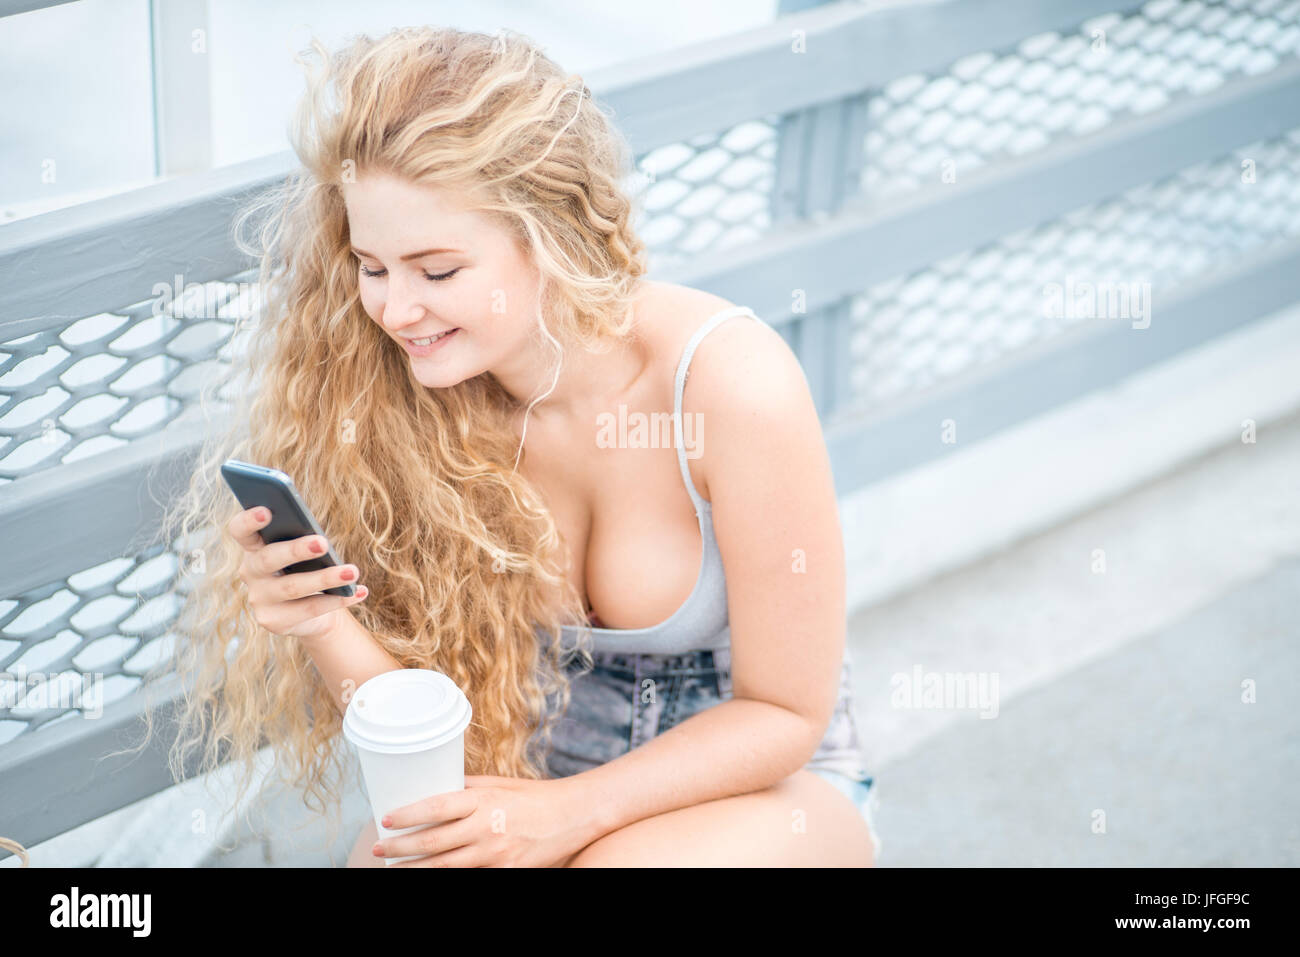 Chatting and surfing. Stock Photo